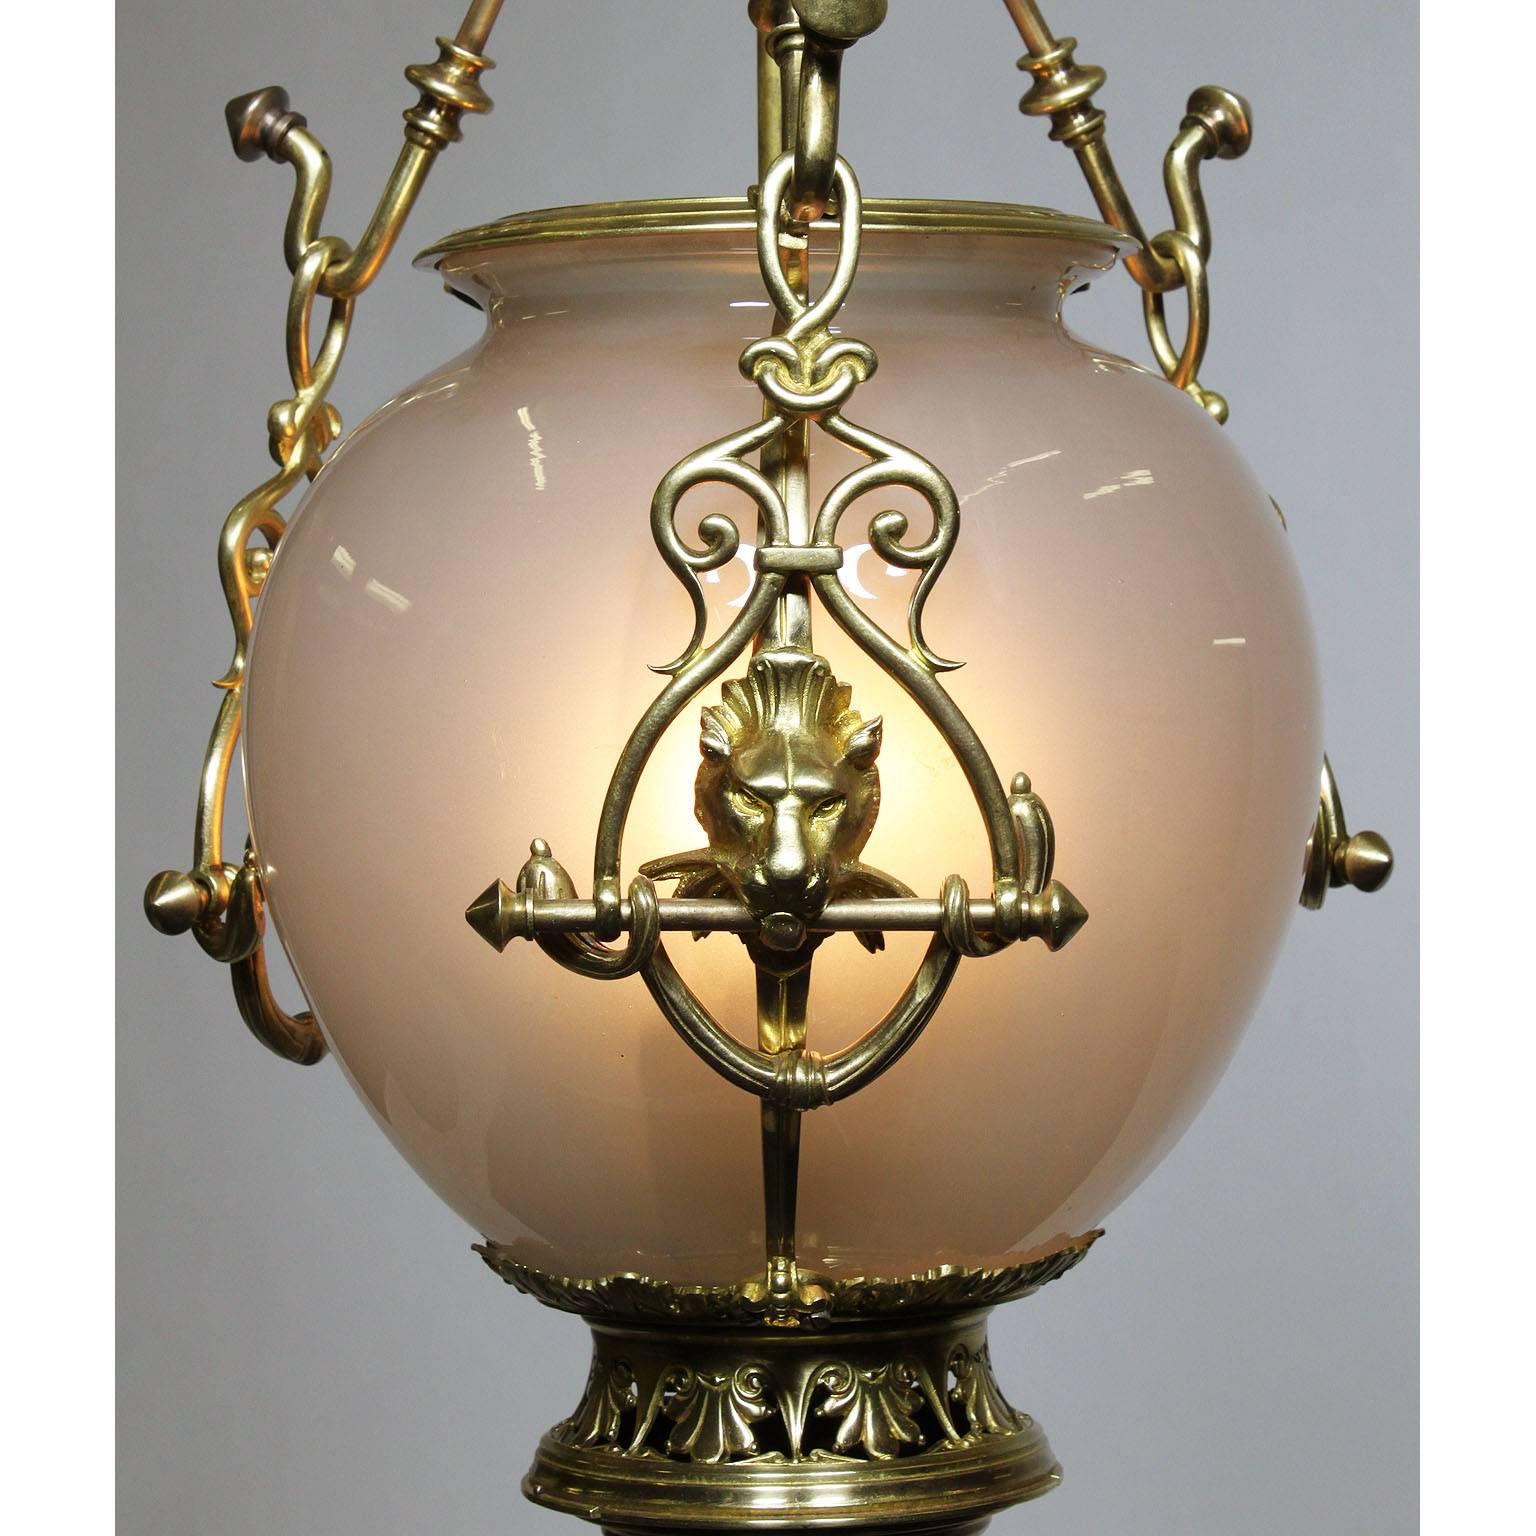 A rare Continental early-mid 20th century neoclassical Revival style gilt-bronze and opaline glass lumière hanging lantern pendant. The ovoid frosted blown-glass globe, with three interior lights, suspended by three ornamental hooks centered with